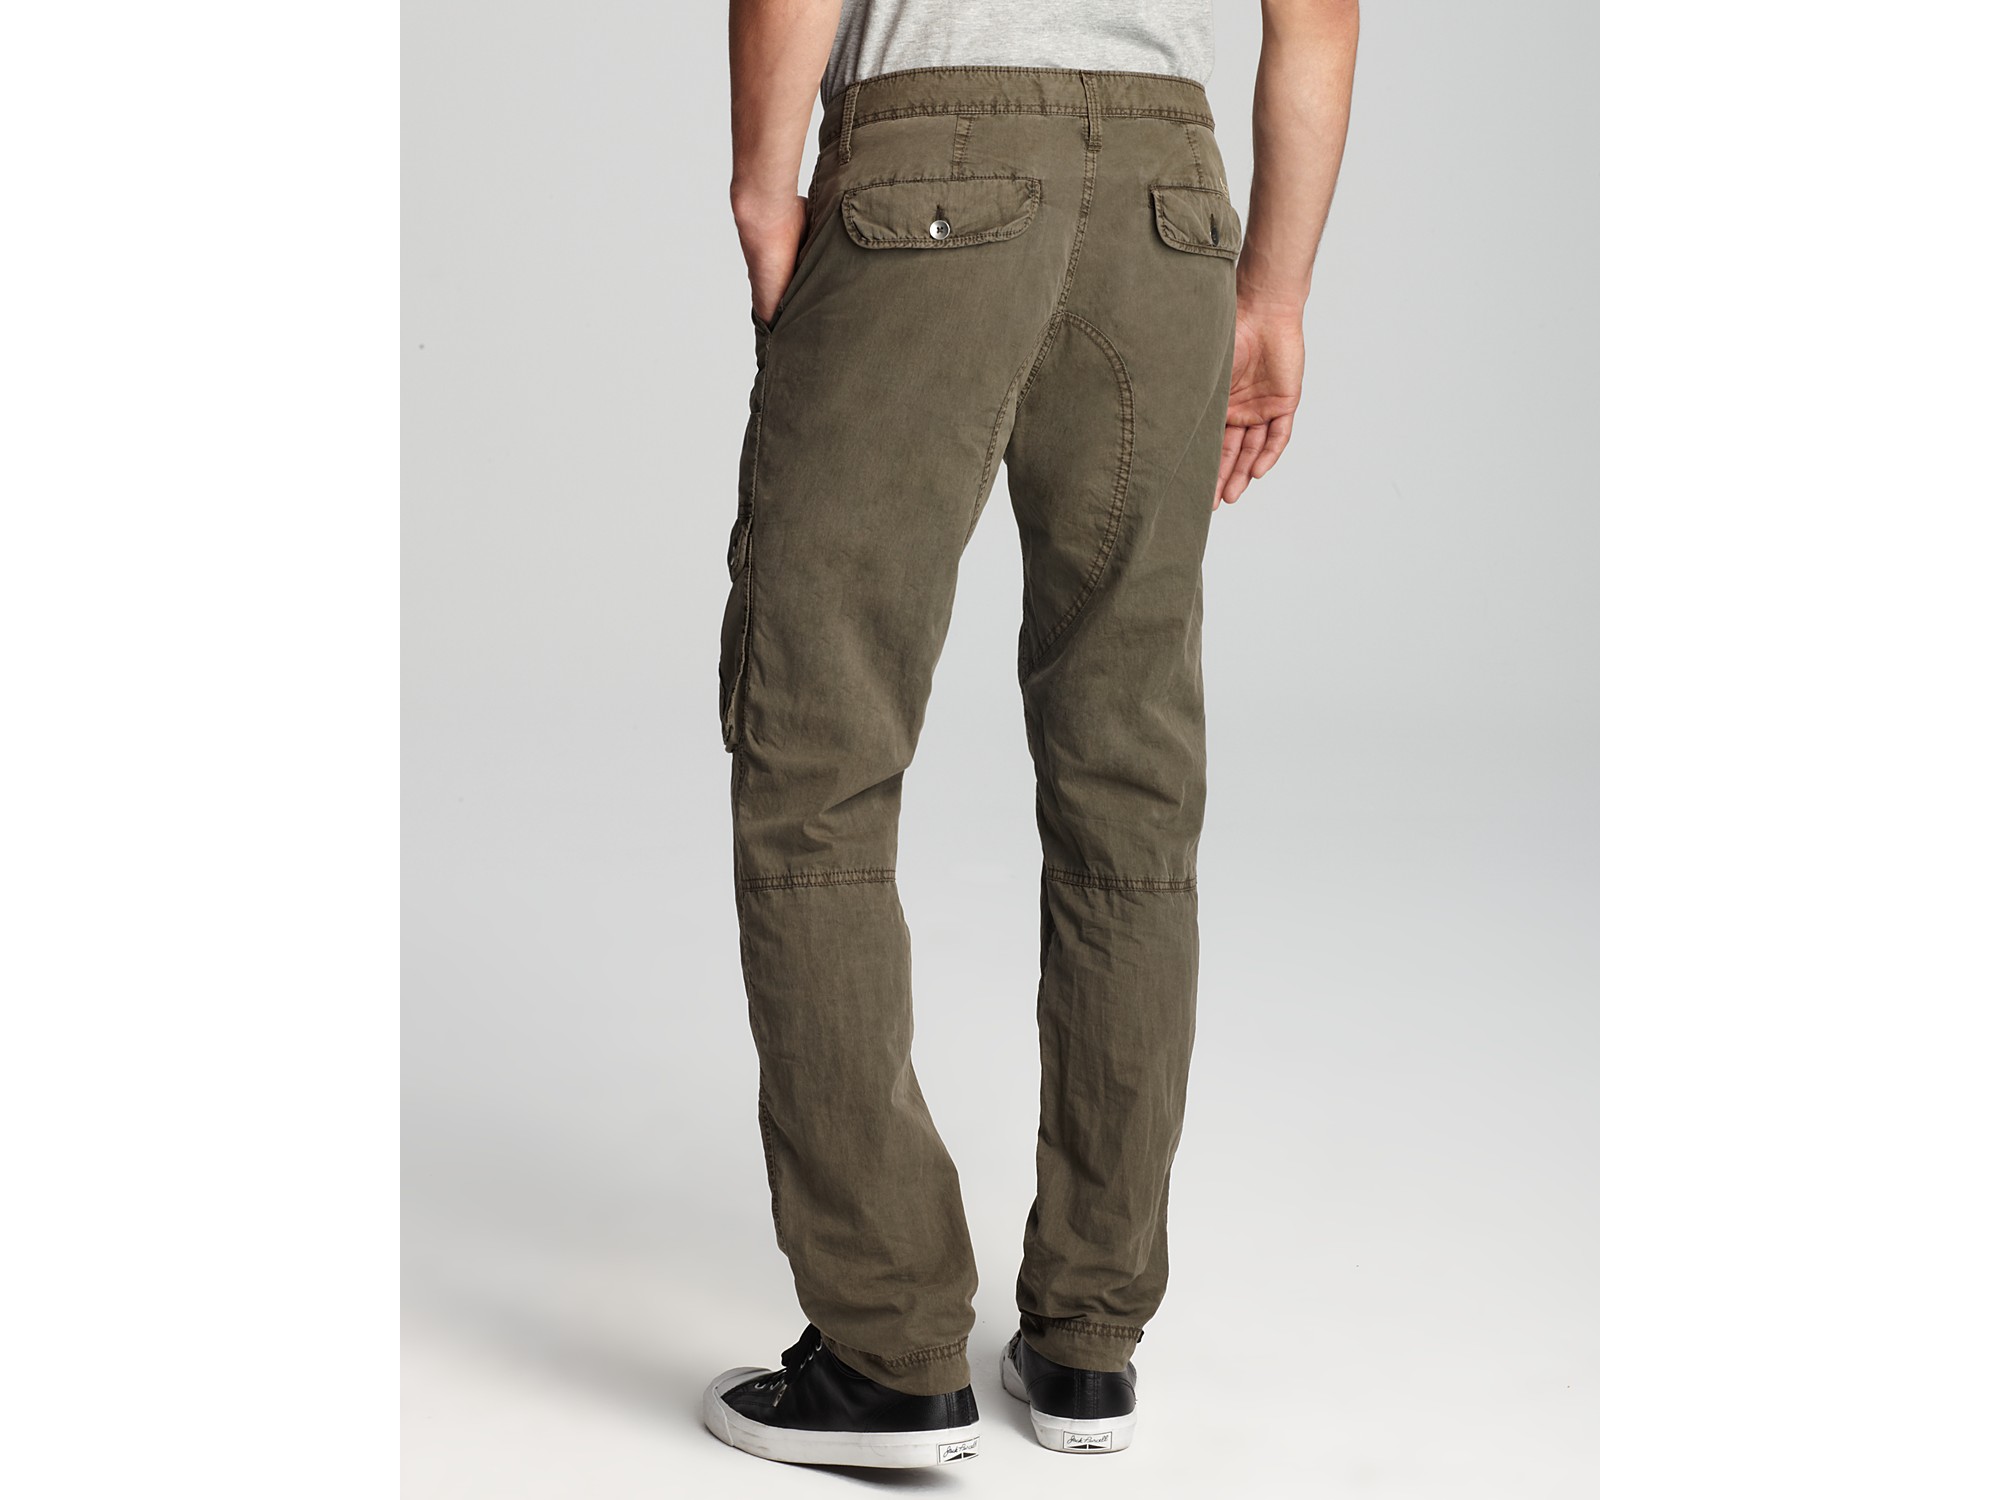 Lyst - Converse Black Canvas Slim Fit Cargo Pants in Green for Men